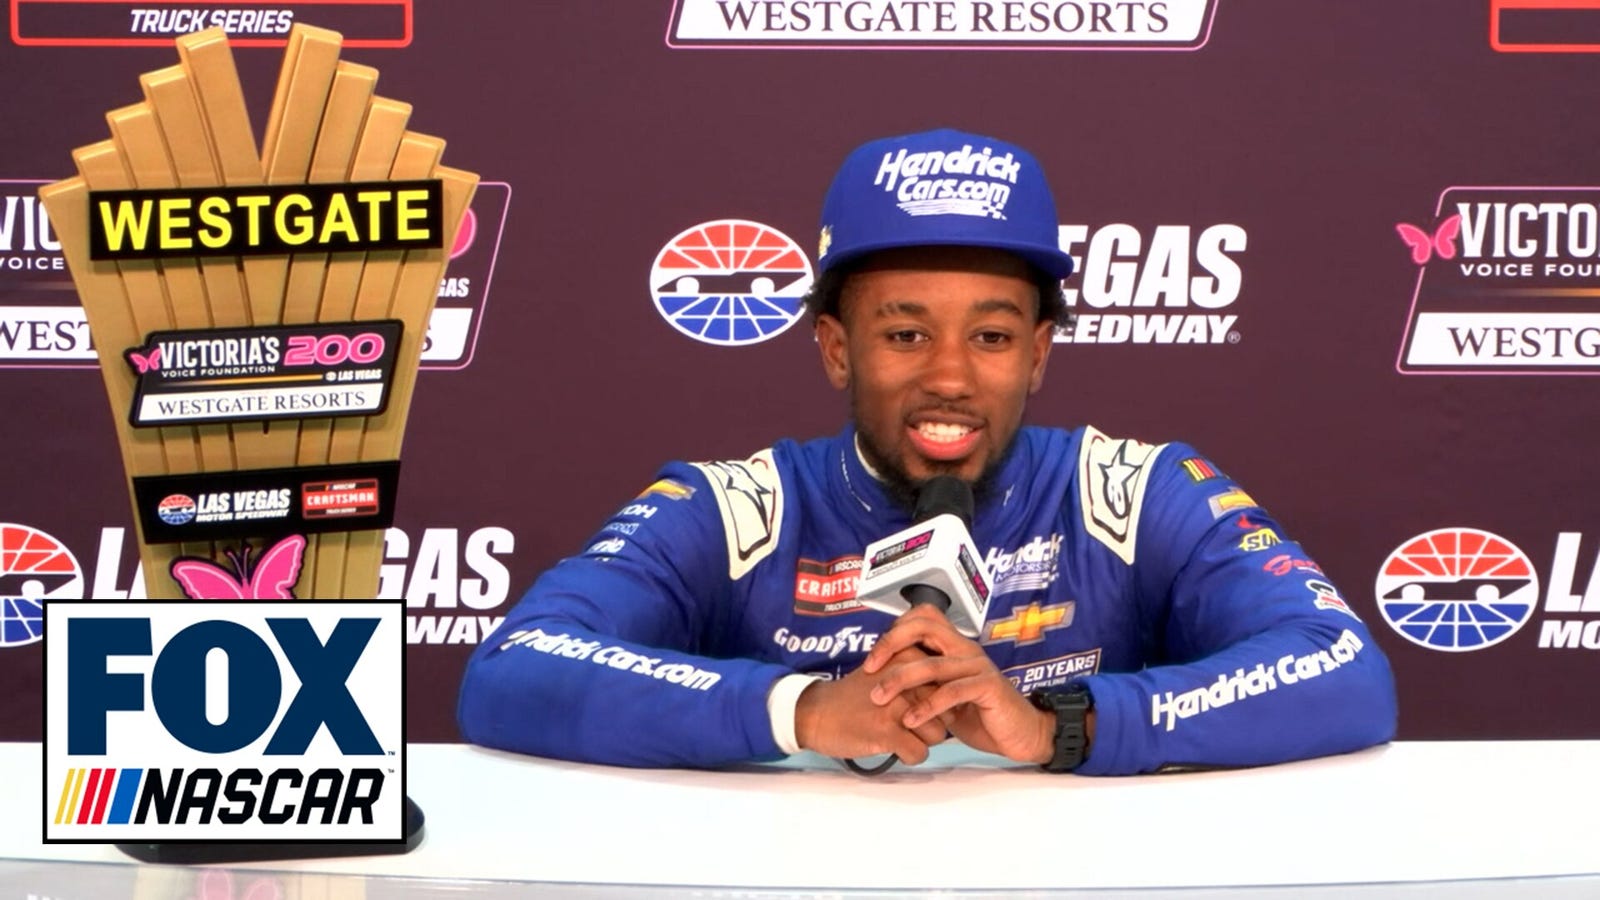 Rajah Caruth on if he thought winning a NASCAR race was possible 